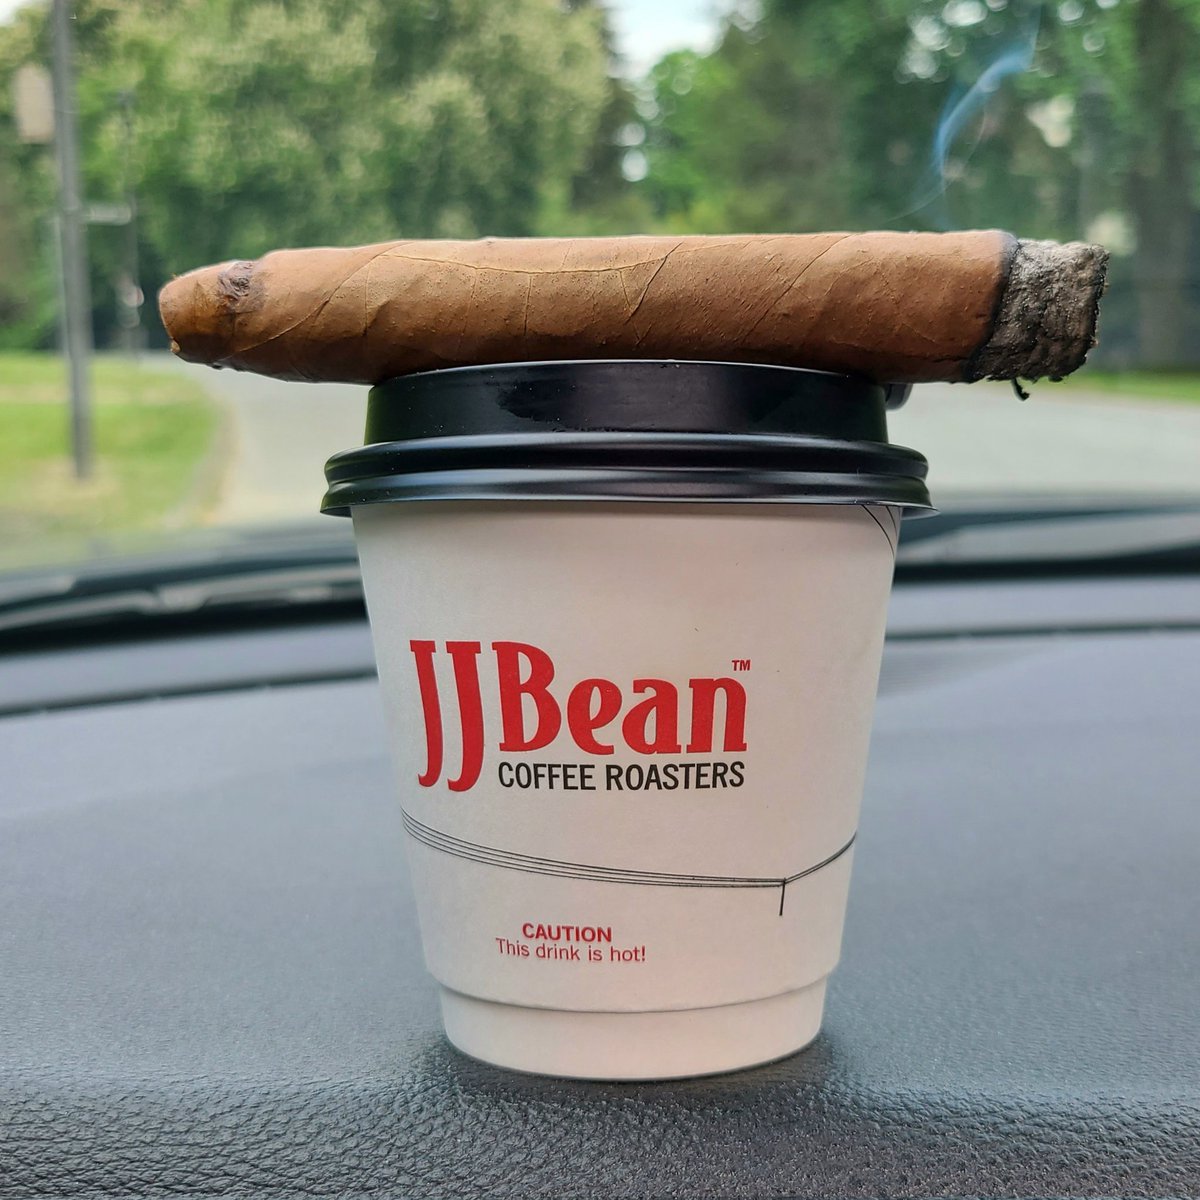 A custom rolled cigar from my private stock and a Colombian coffee from JJ Bean at Granville Island. #2000cigars #2000cigarsdelivery #customrolledcubancigar #jjbeancoffee #colombiancoffee #granvilleisland #myhabanosmoment #cigarlover